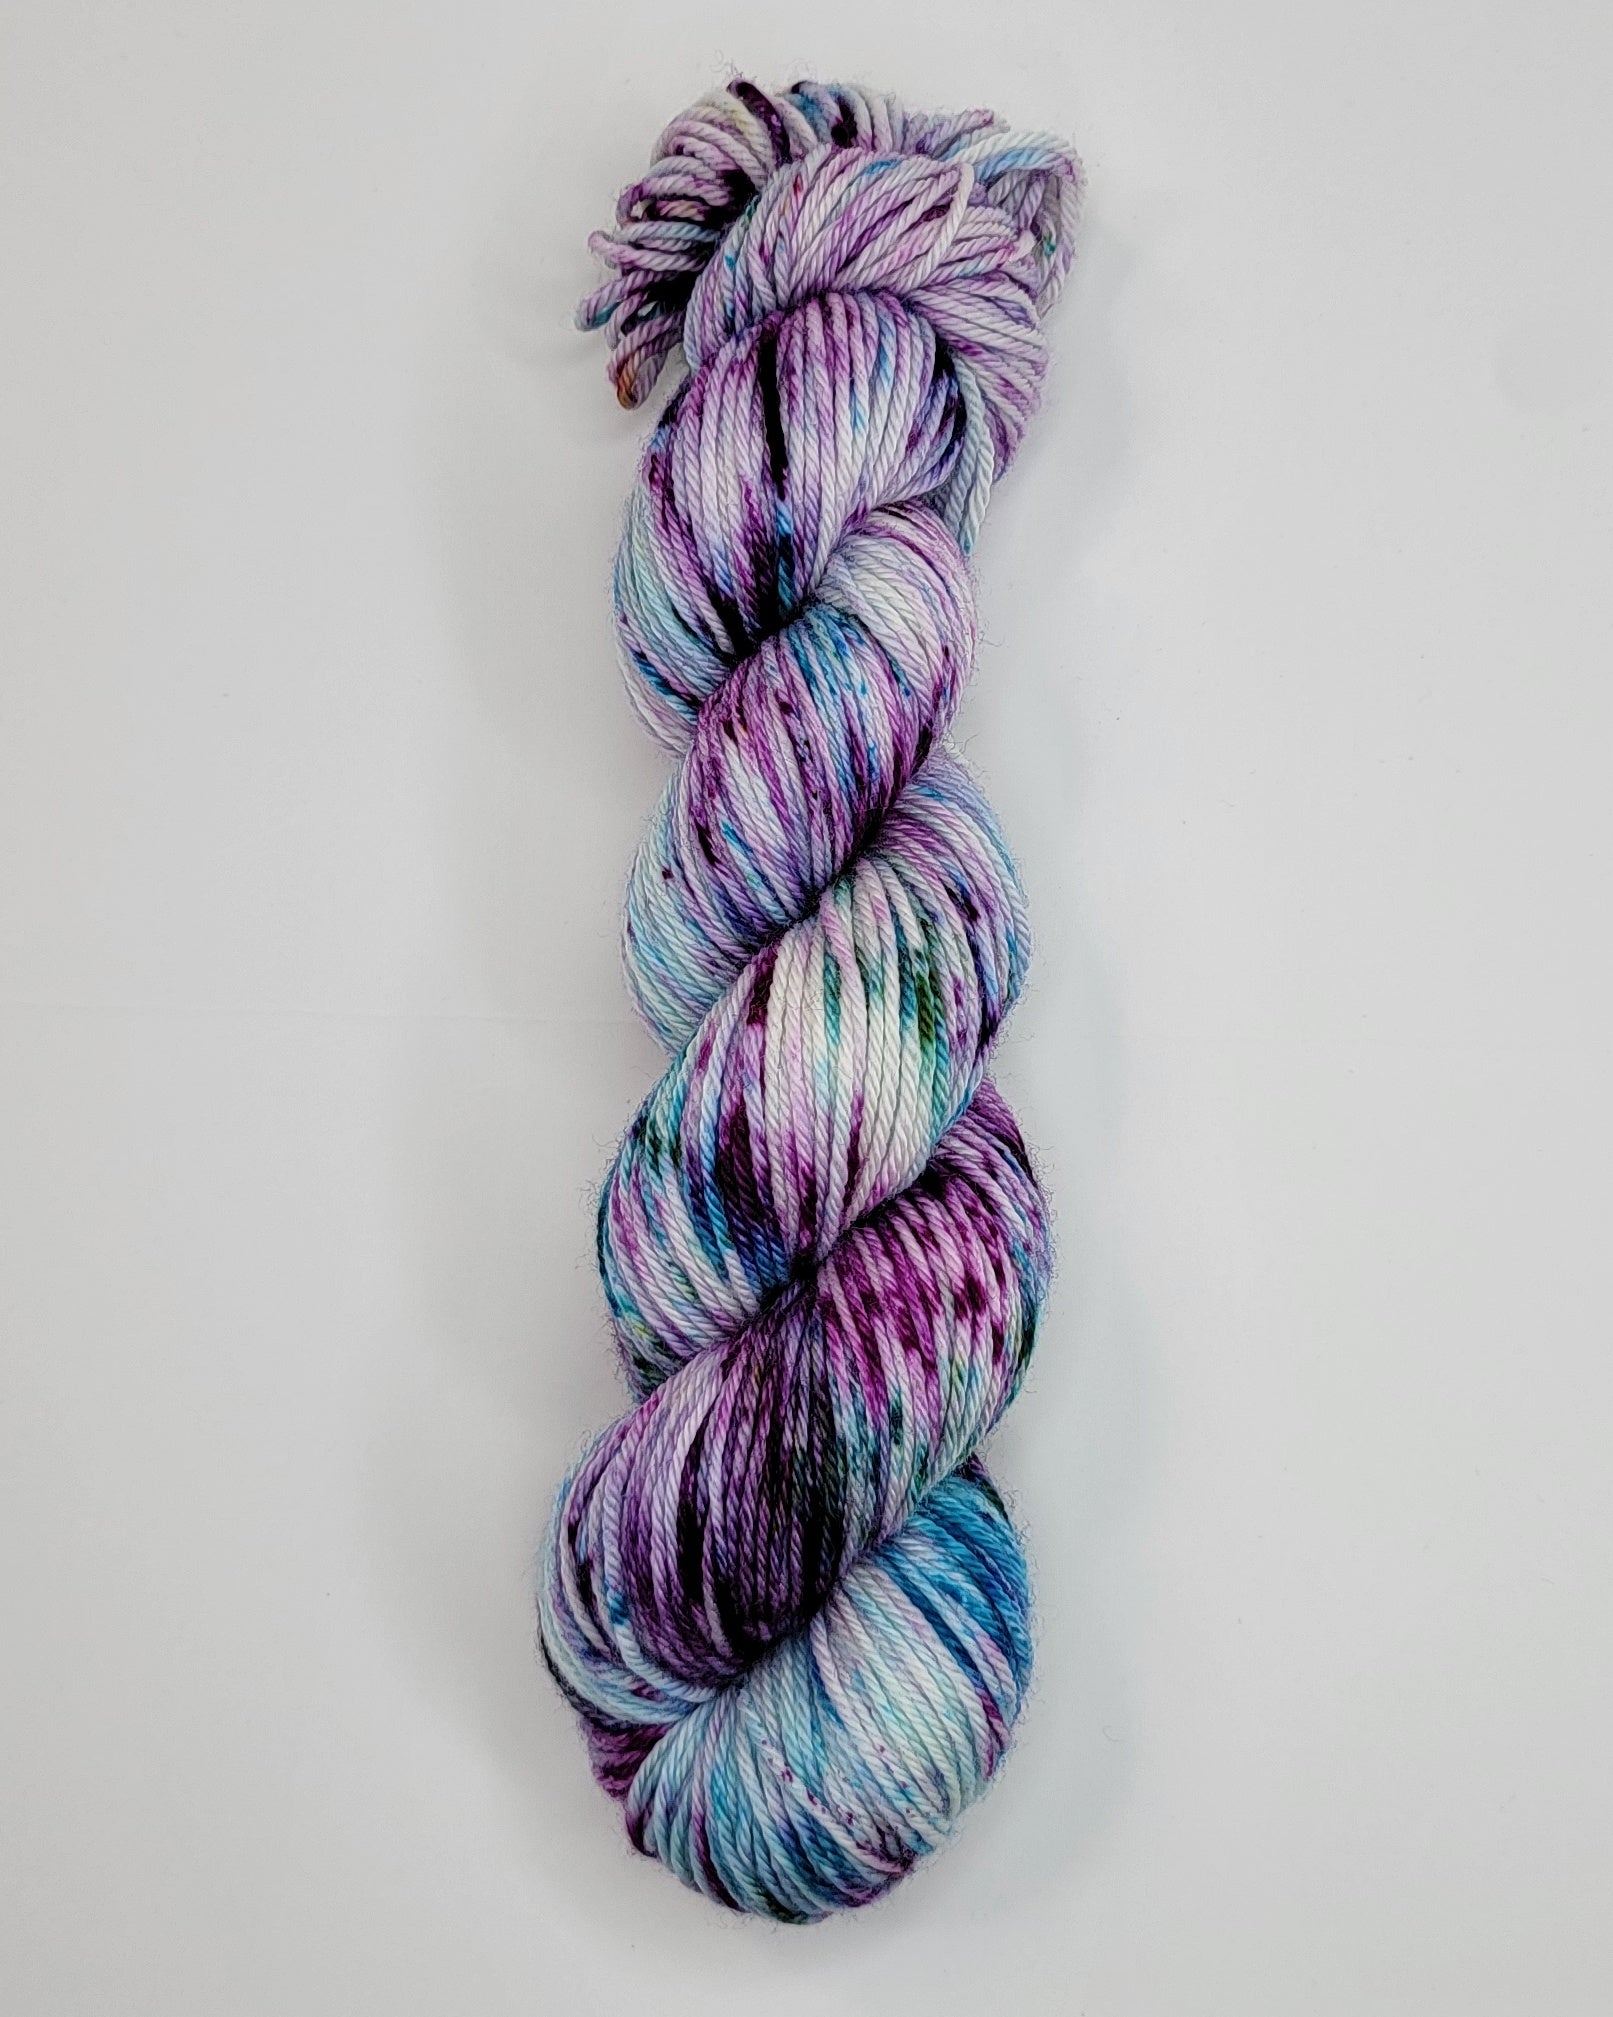 Finding Joy on worsted